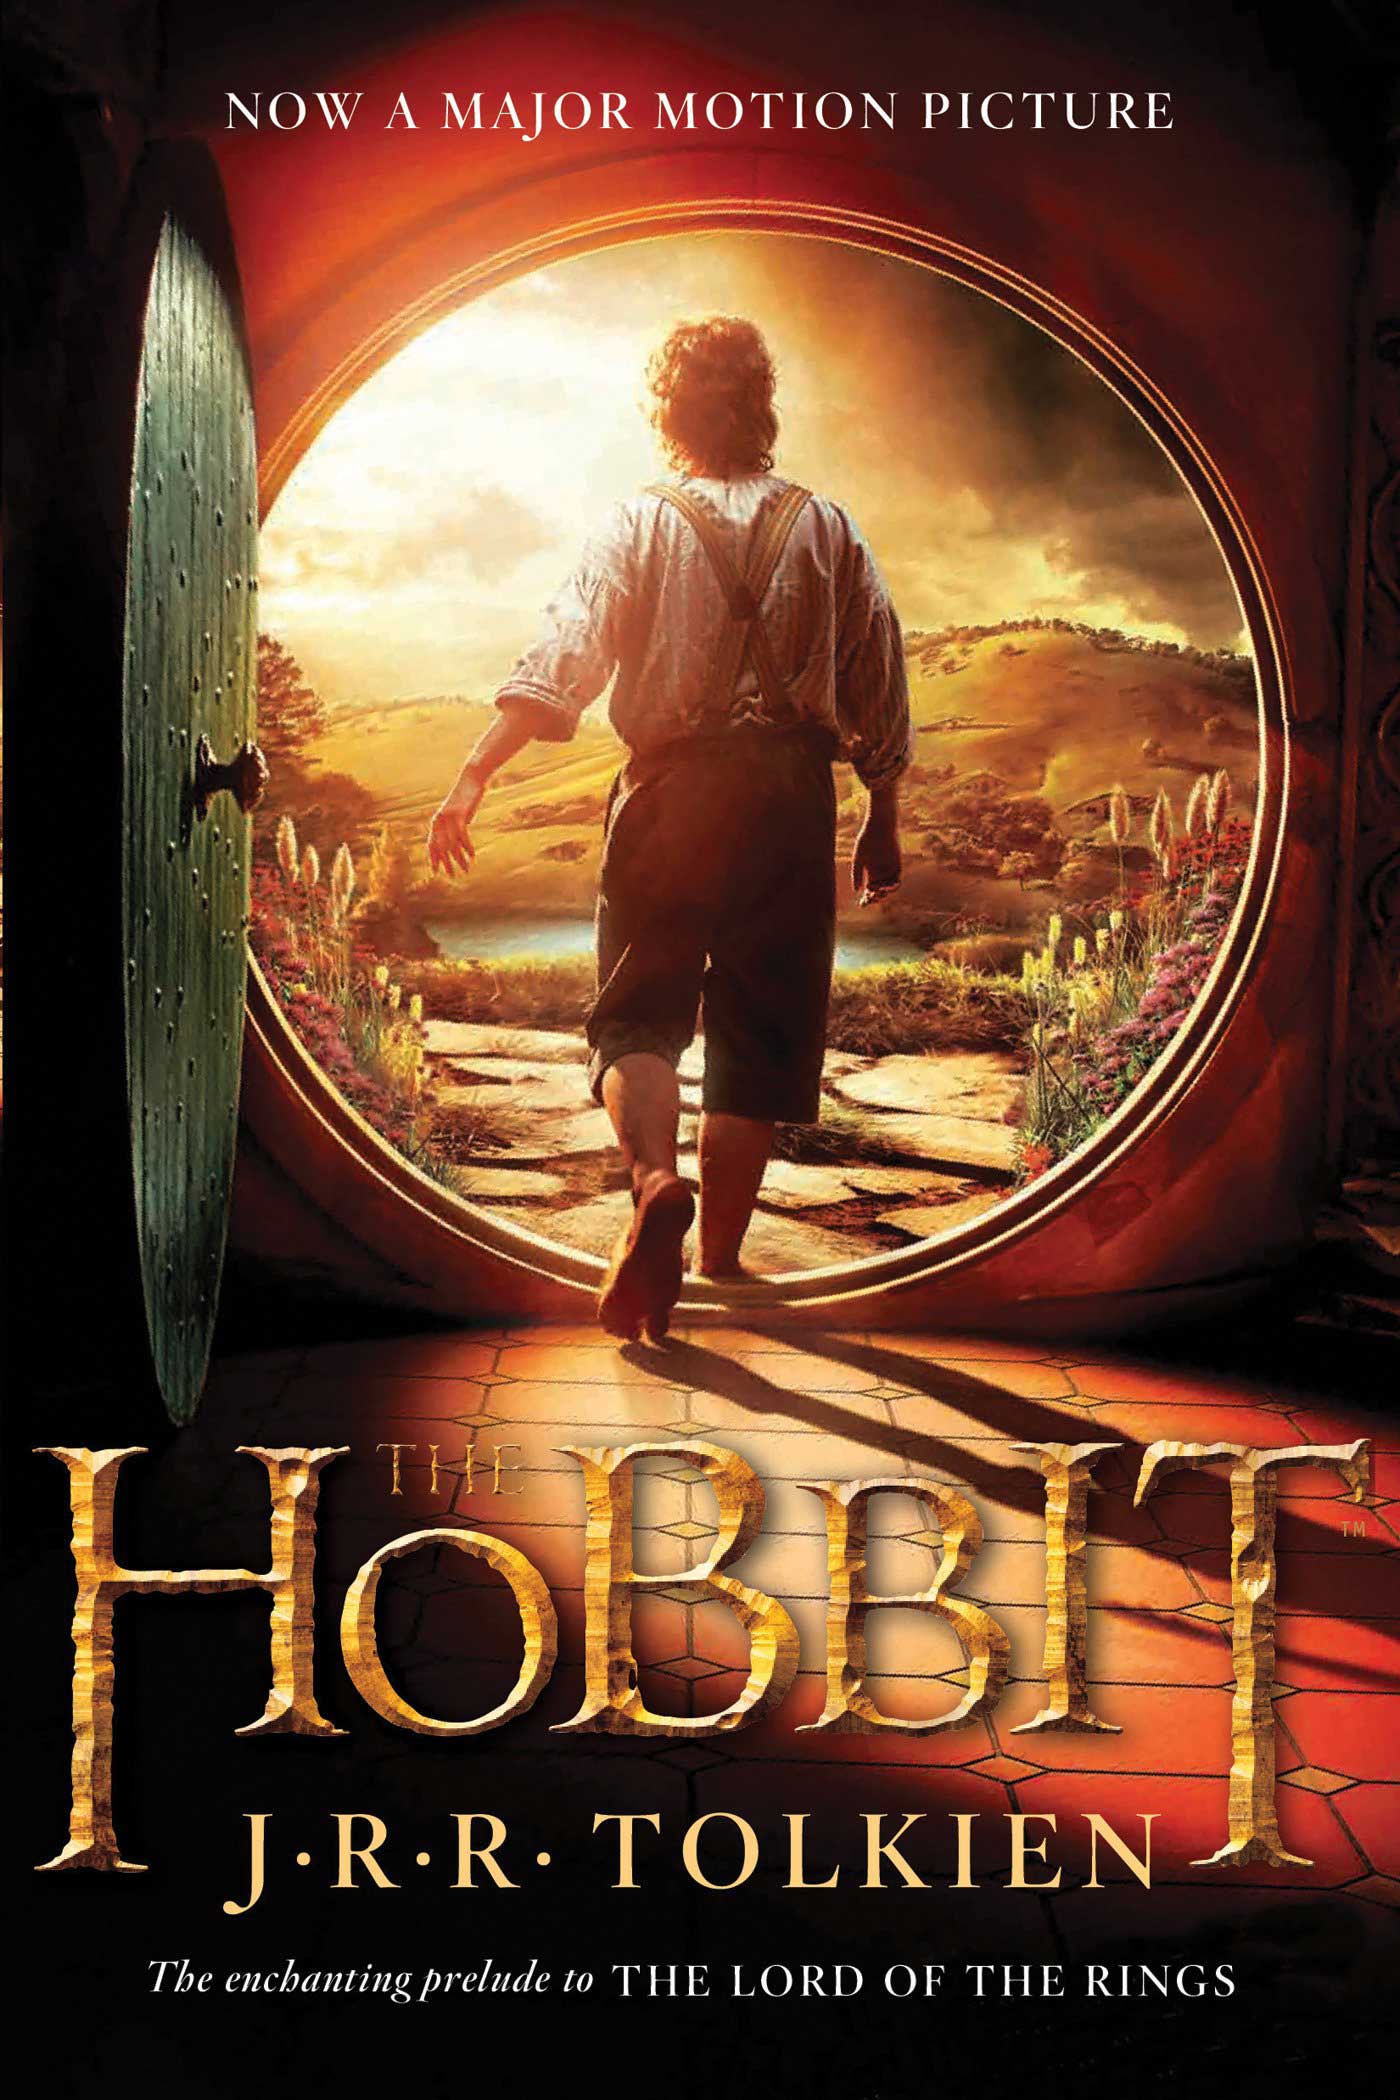 The Hobbit, by J.R.R. Tolkien. 
                              
                              
                              
                              Bilbo Baggins sets off on an adventure through Tolkien’s ingenious world in the prelude to the Lord of the Rings trilogy.
                              
                              
                              
                              Buy now: The Hobbit